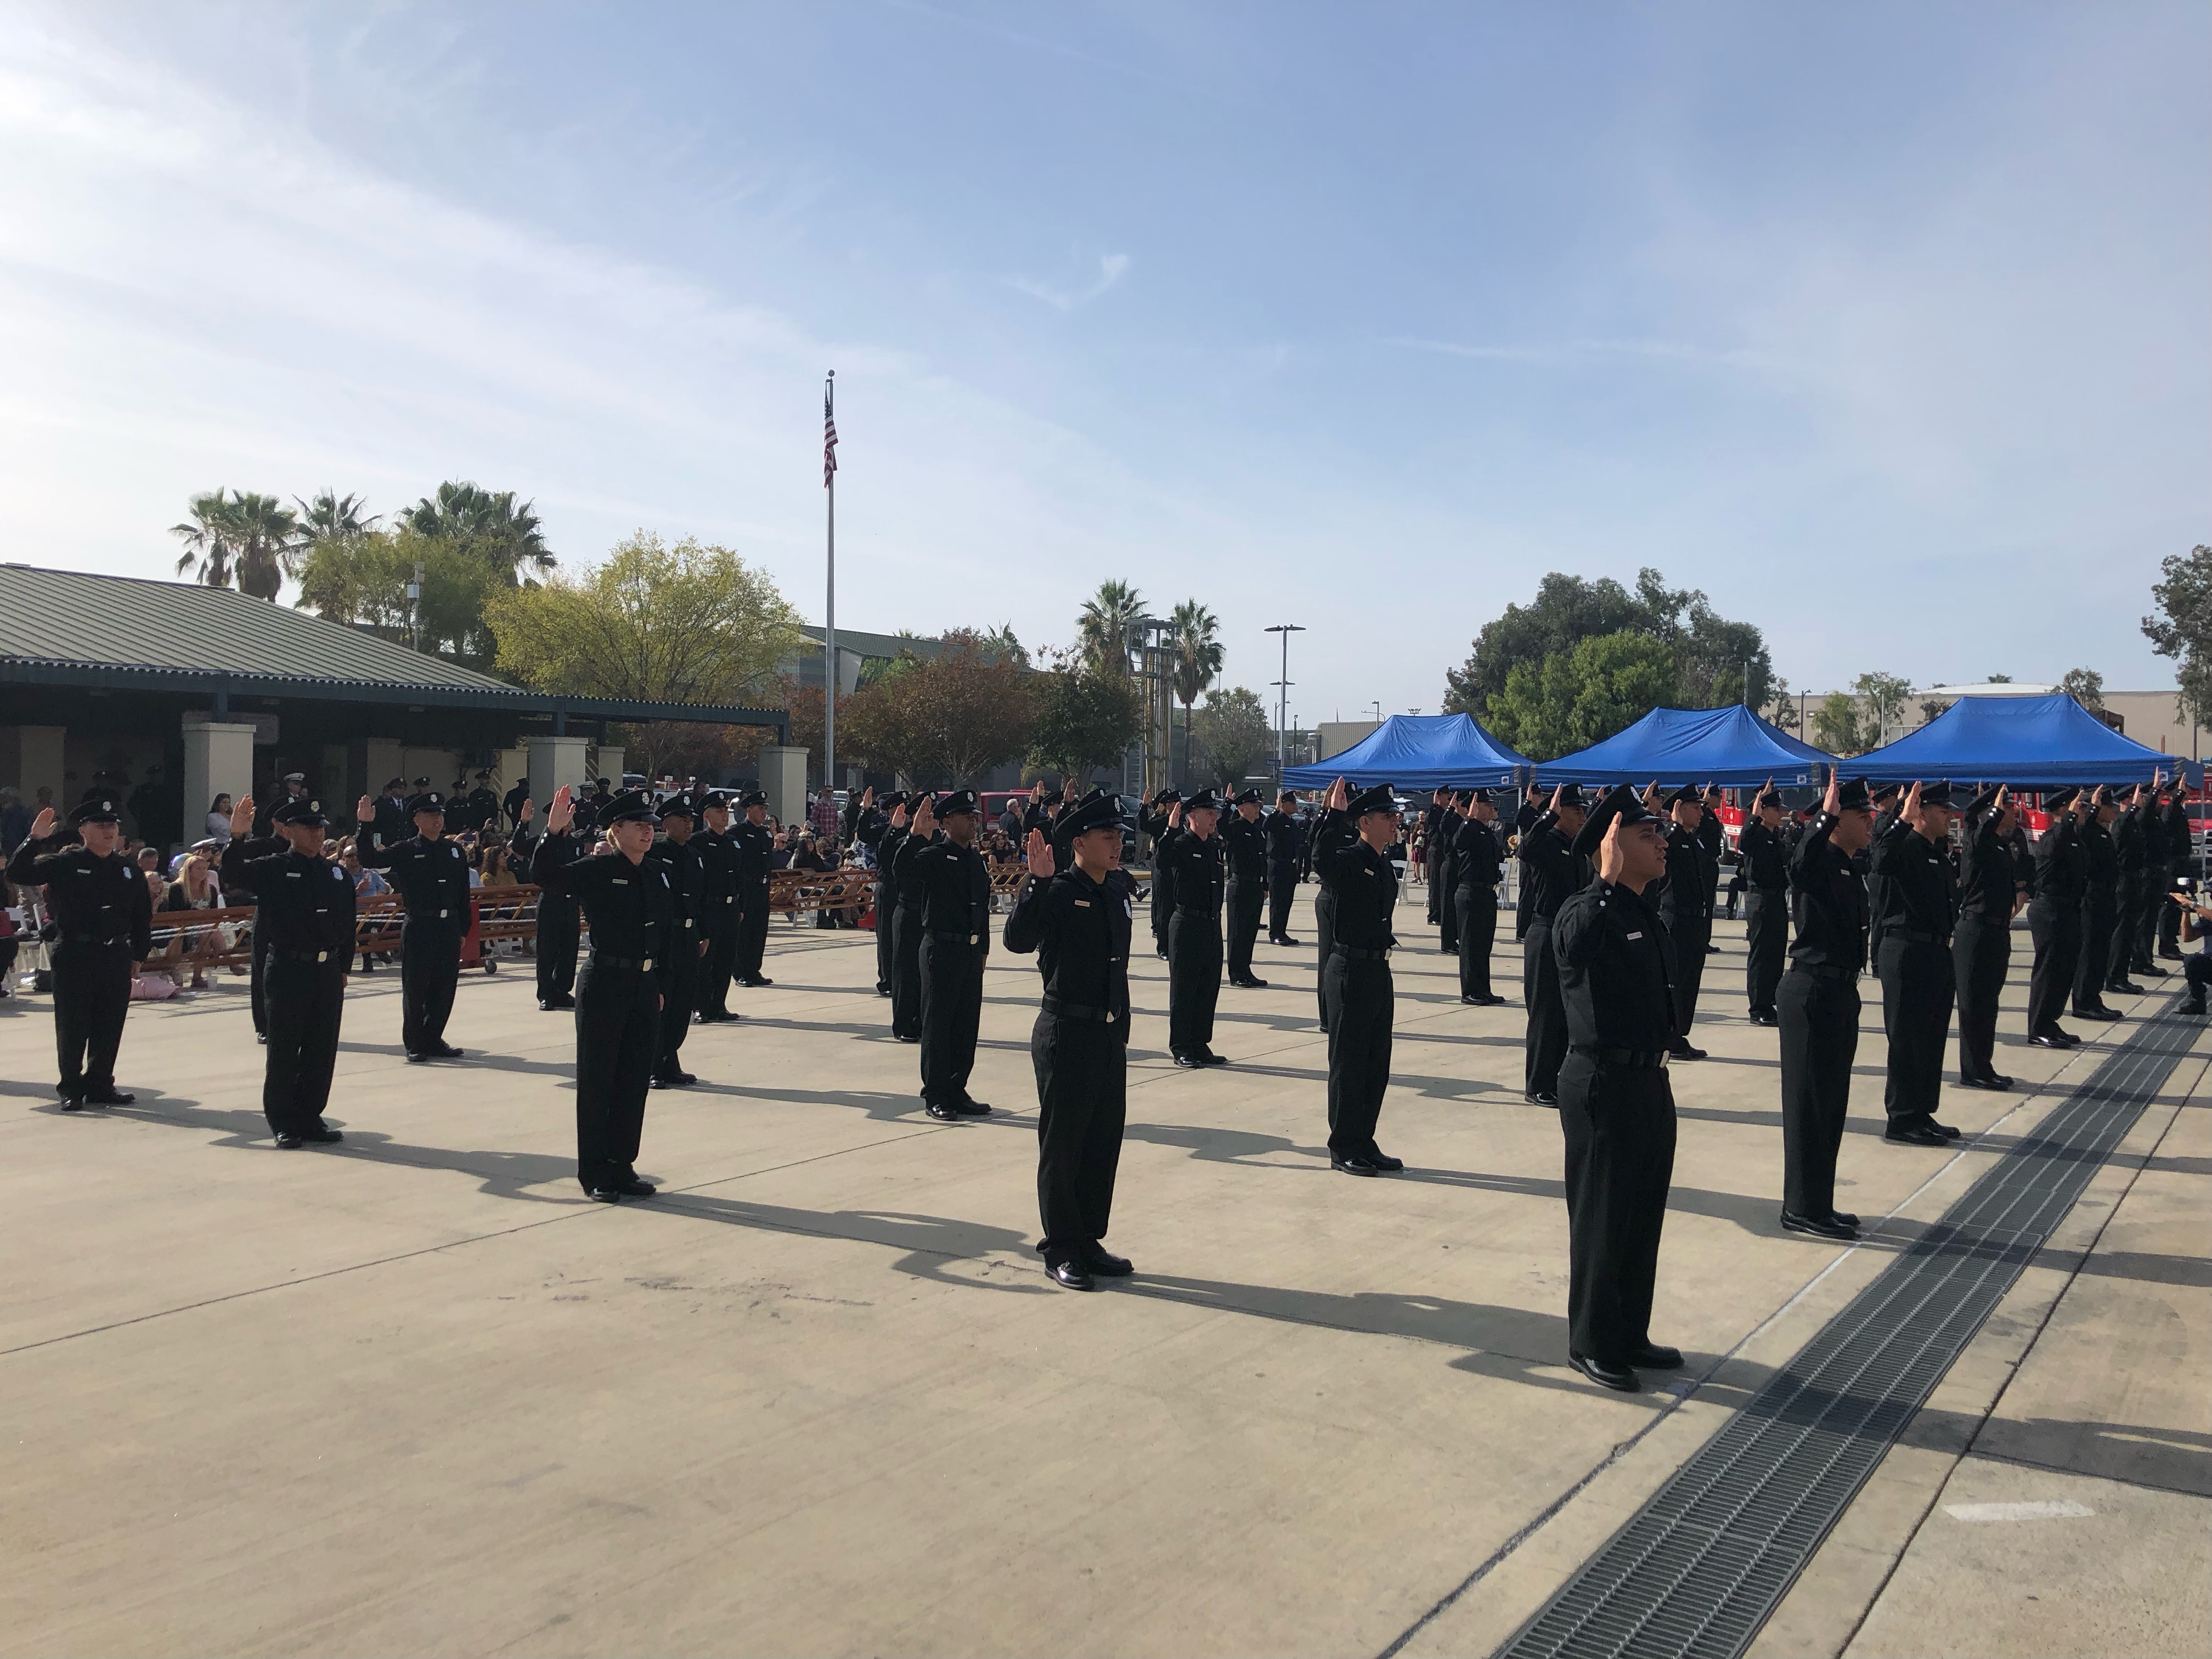 Firefighter Recruits with right hands in the air, reciting the Firefighter Affirmation